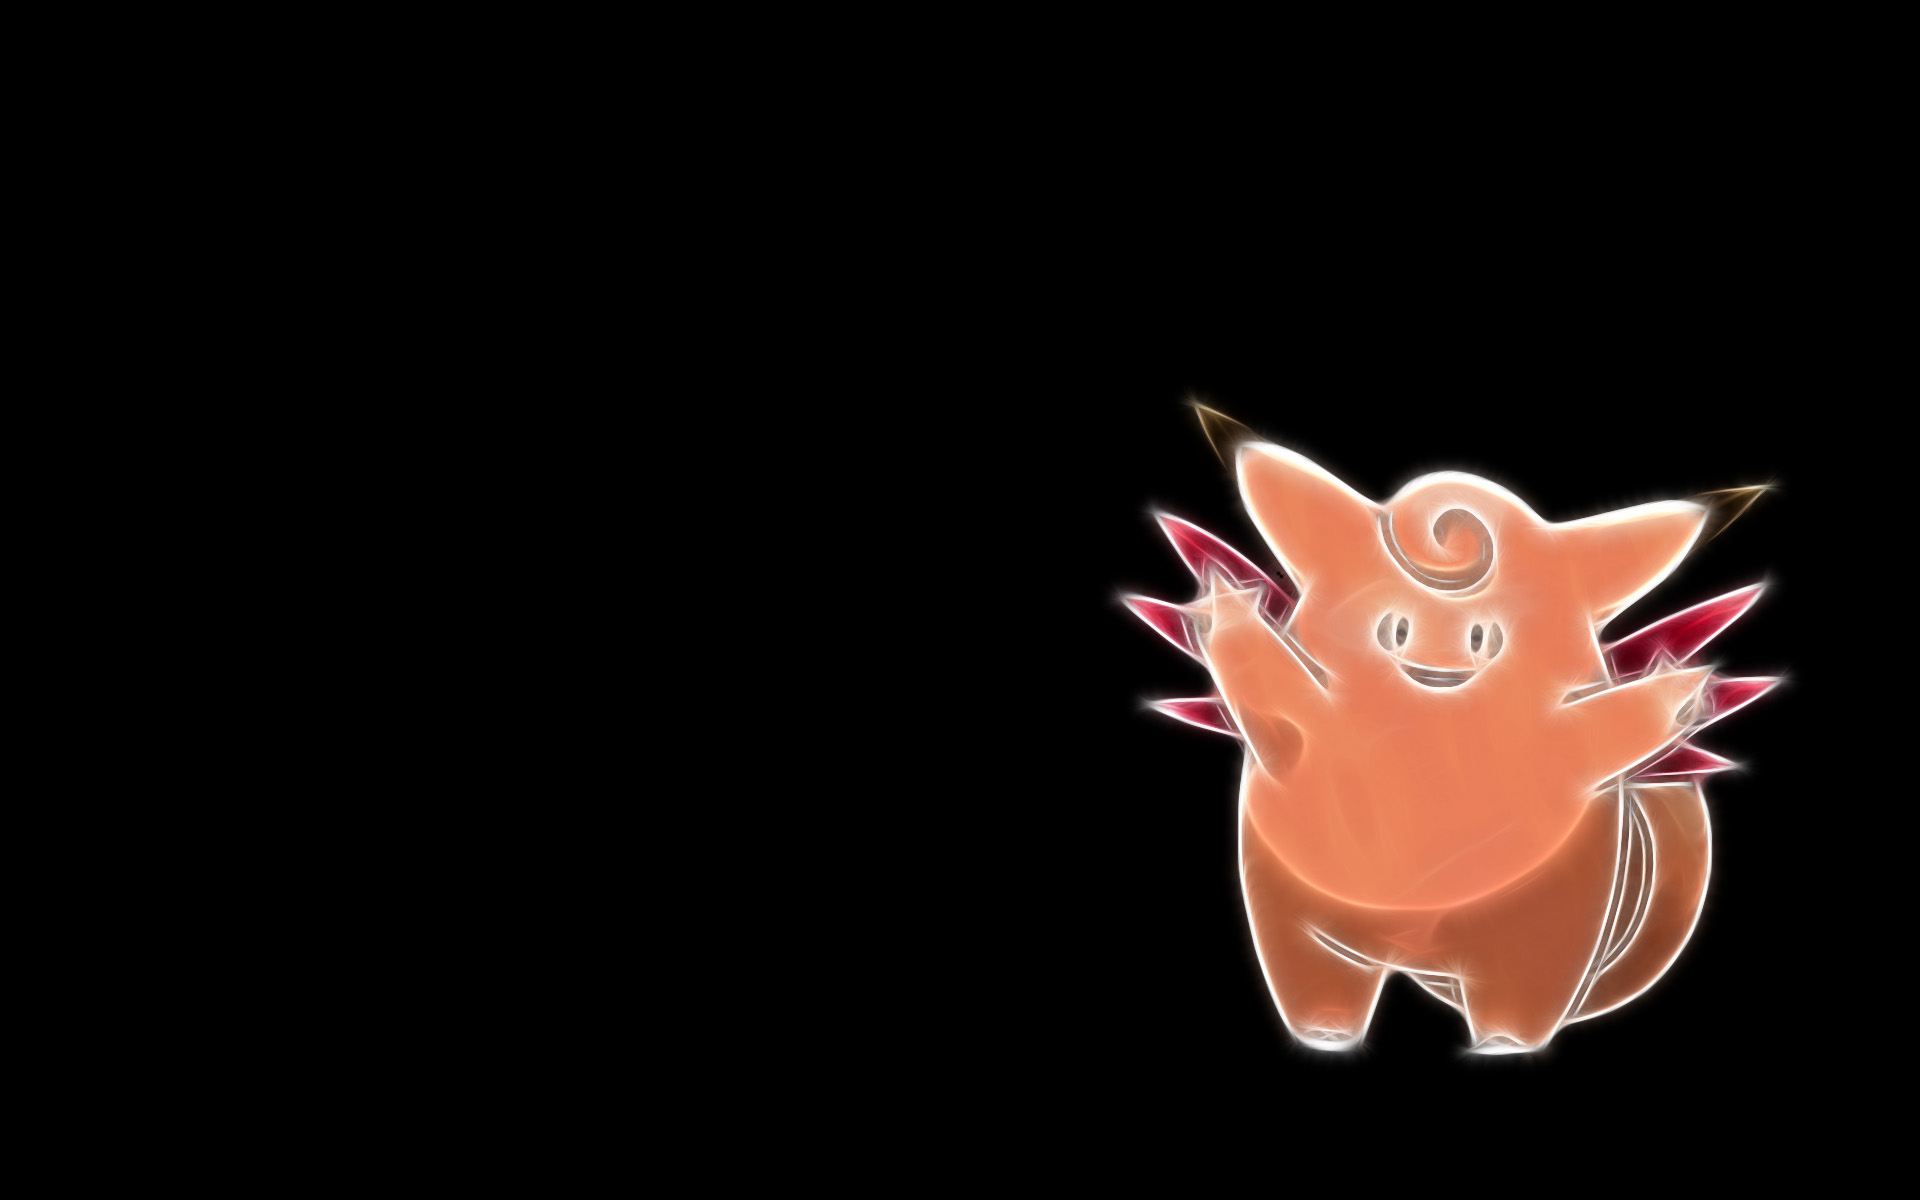 The Clefable Wallpaper iPhone